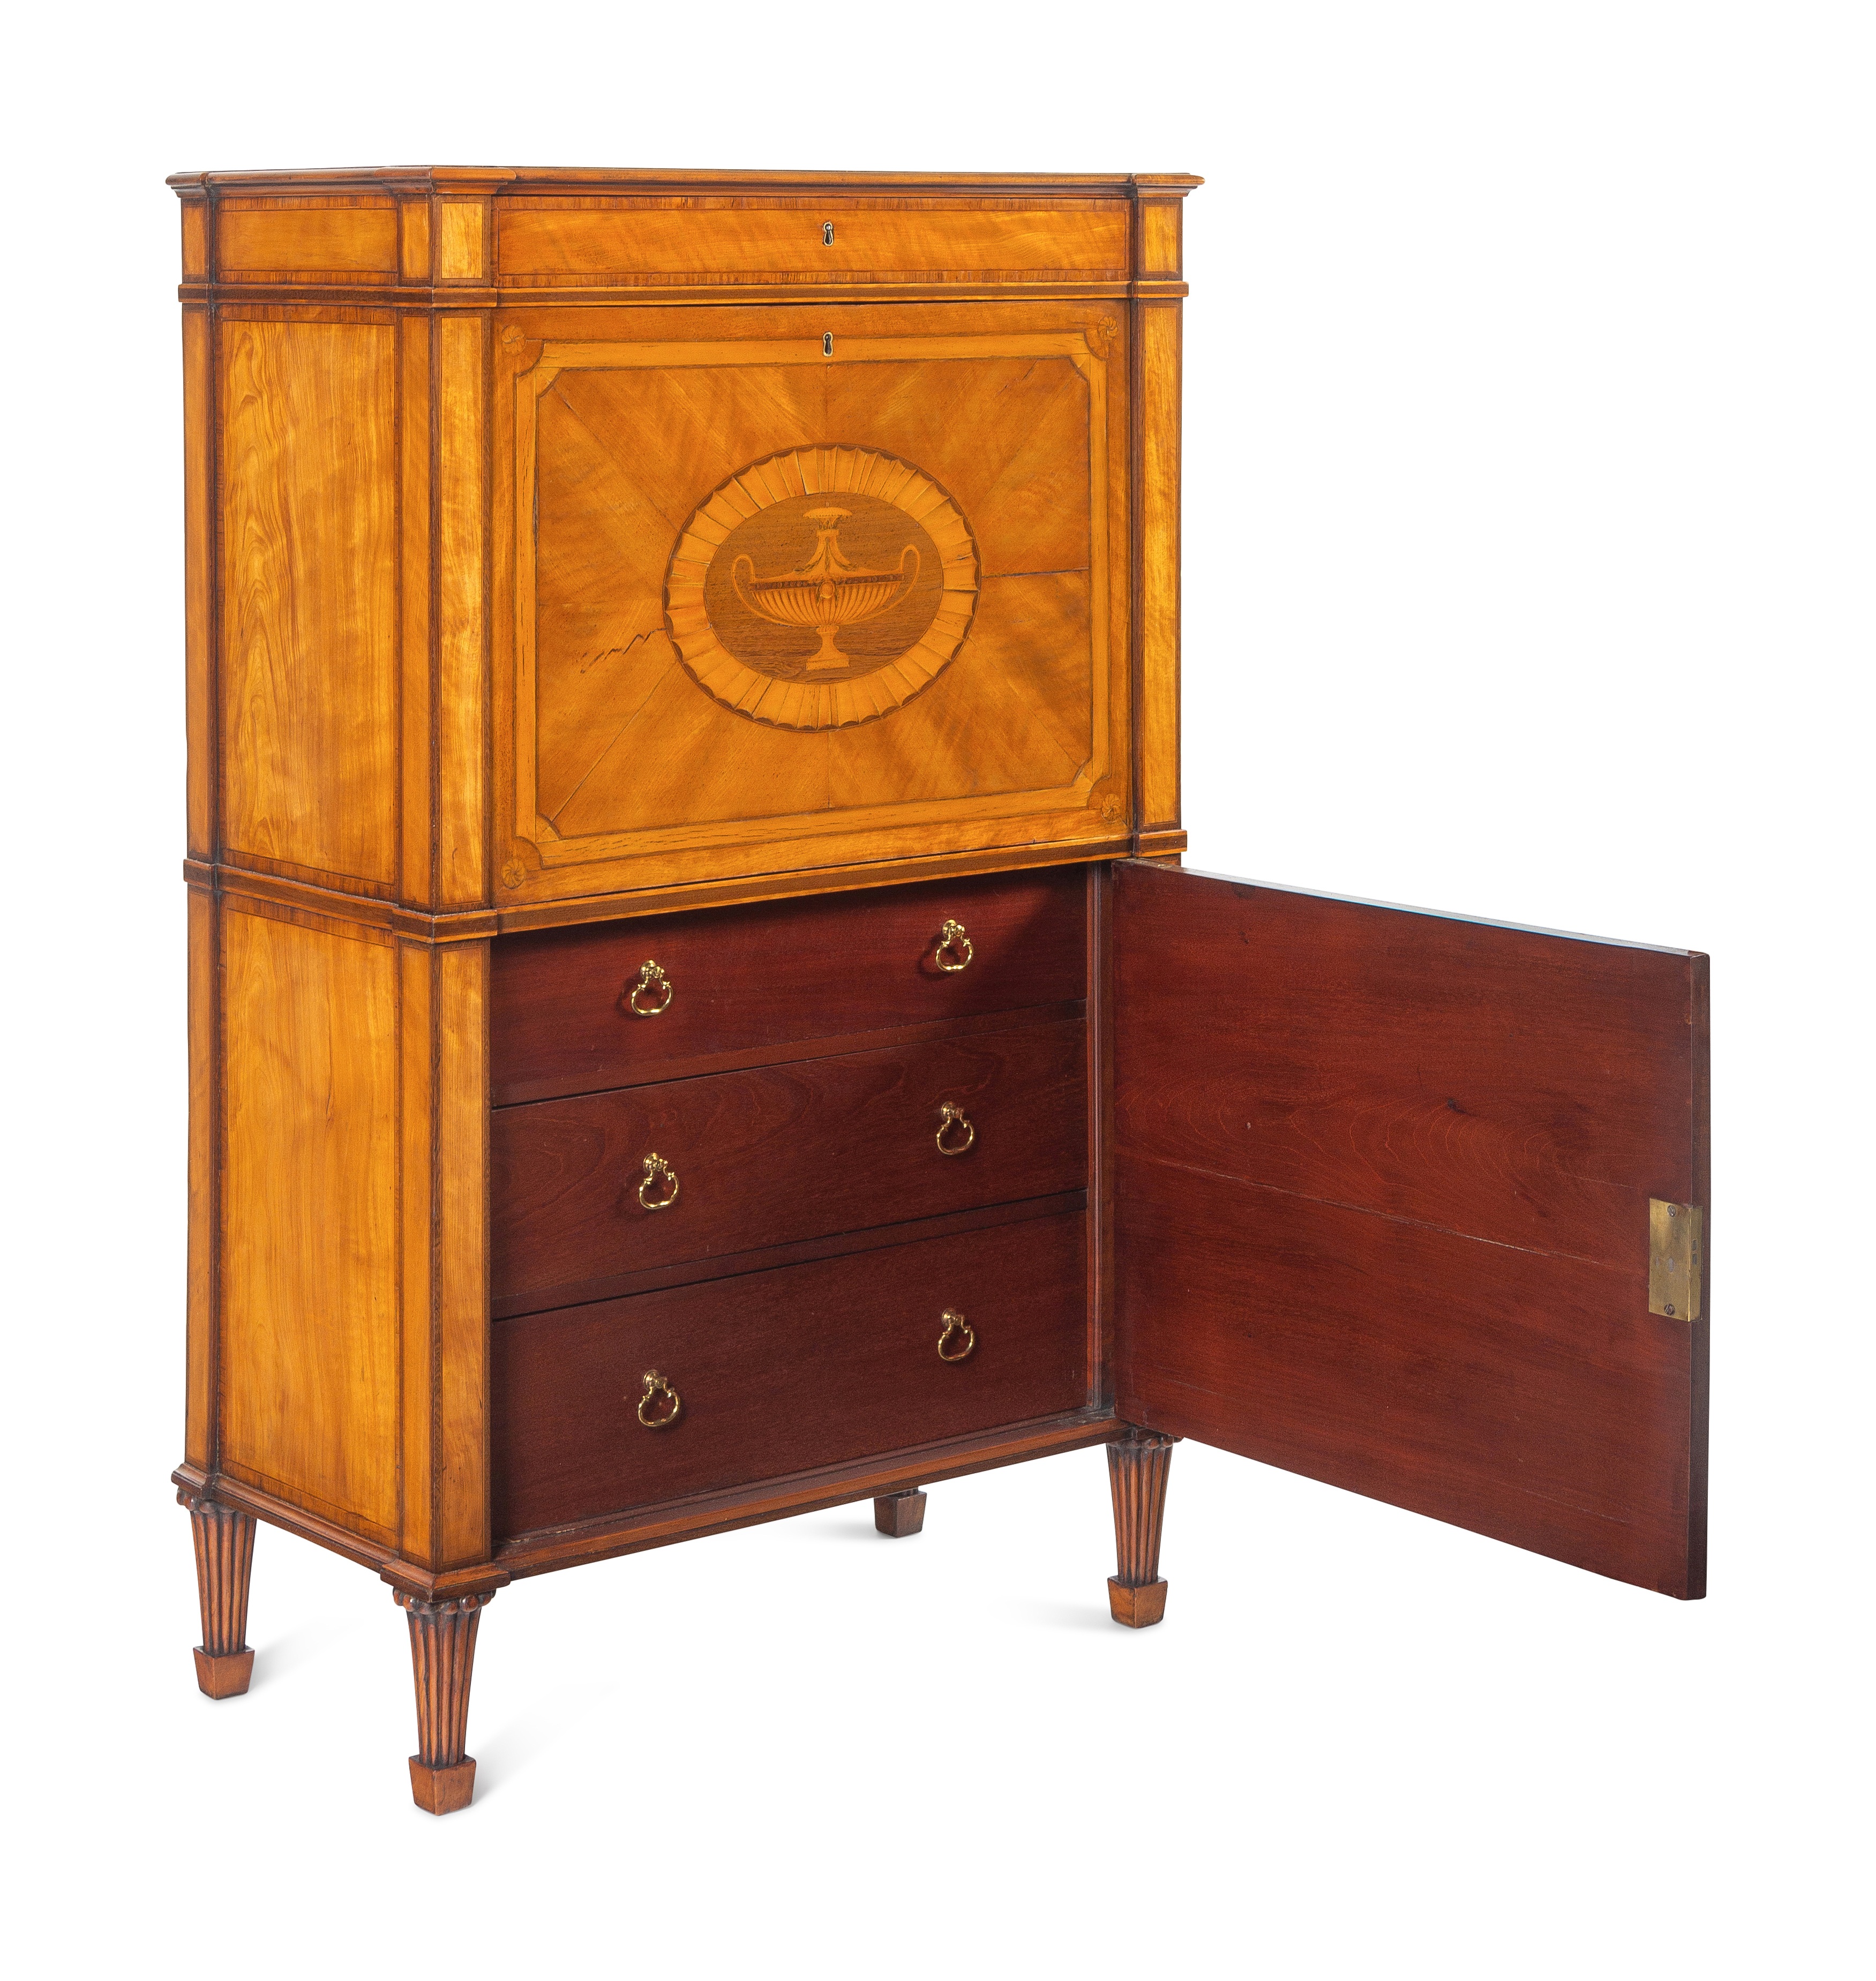 A George III Satinwood, Tulipwood and Amaranth Marquetry Fall-Front Secretaire - Image 4 of 11